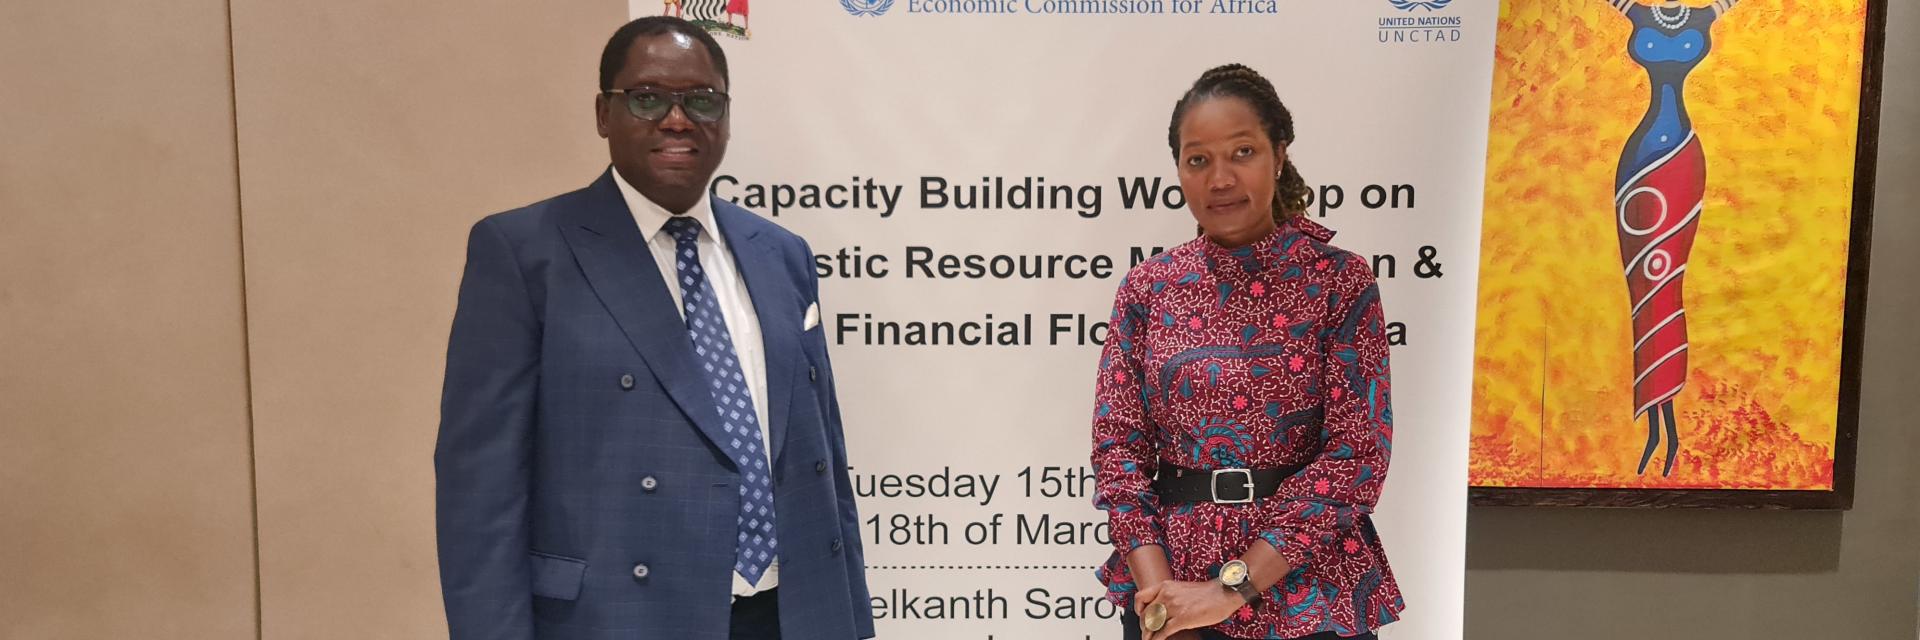 Capacity Building Workshop on Domestic Resource Mobilization and Illicit Financial Flows in Zambia